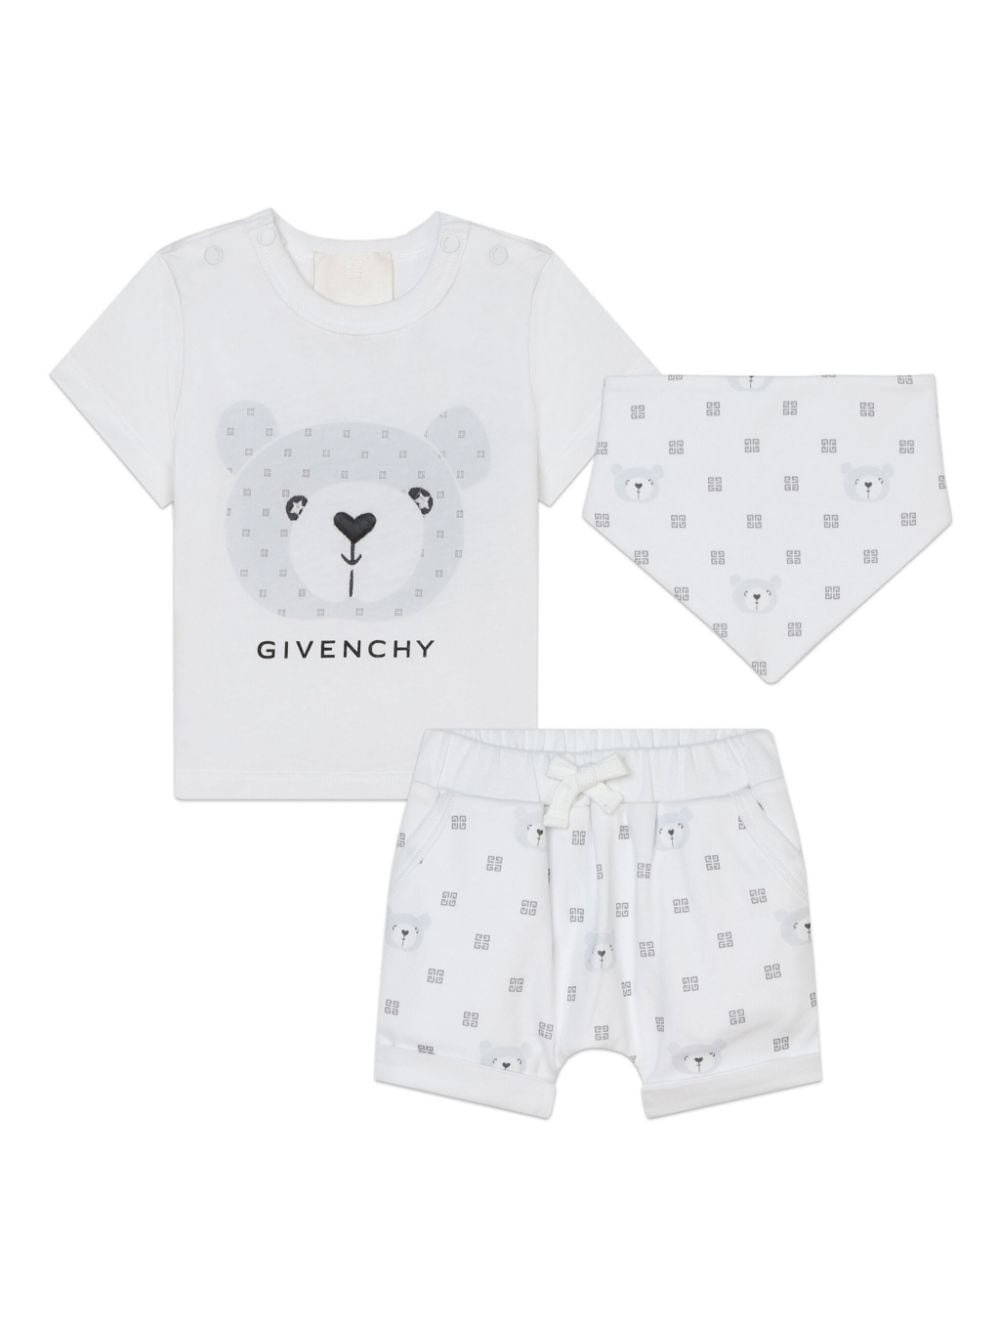 Givenchy Babies' 4g 棉短裤套装（三件装） In White